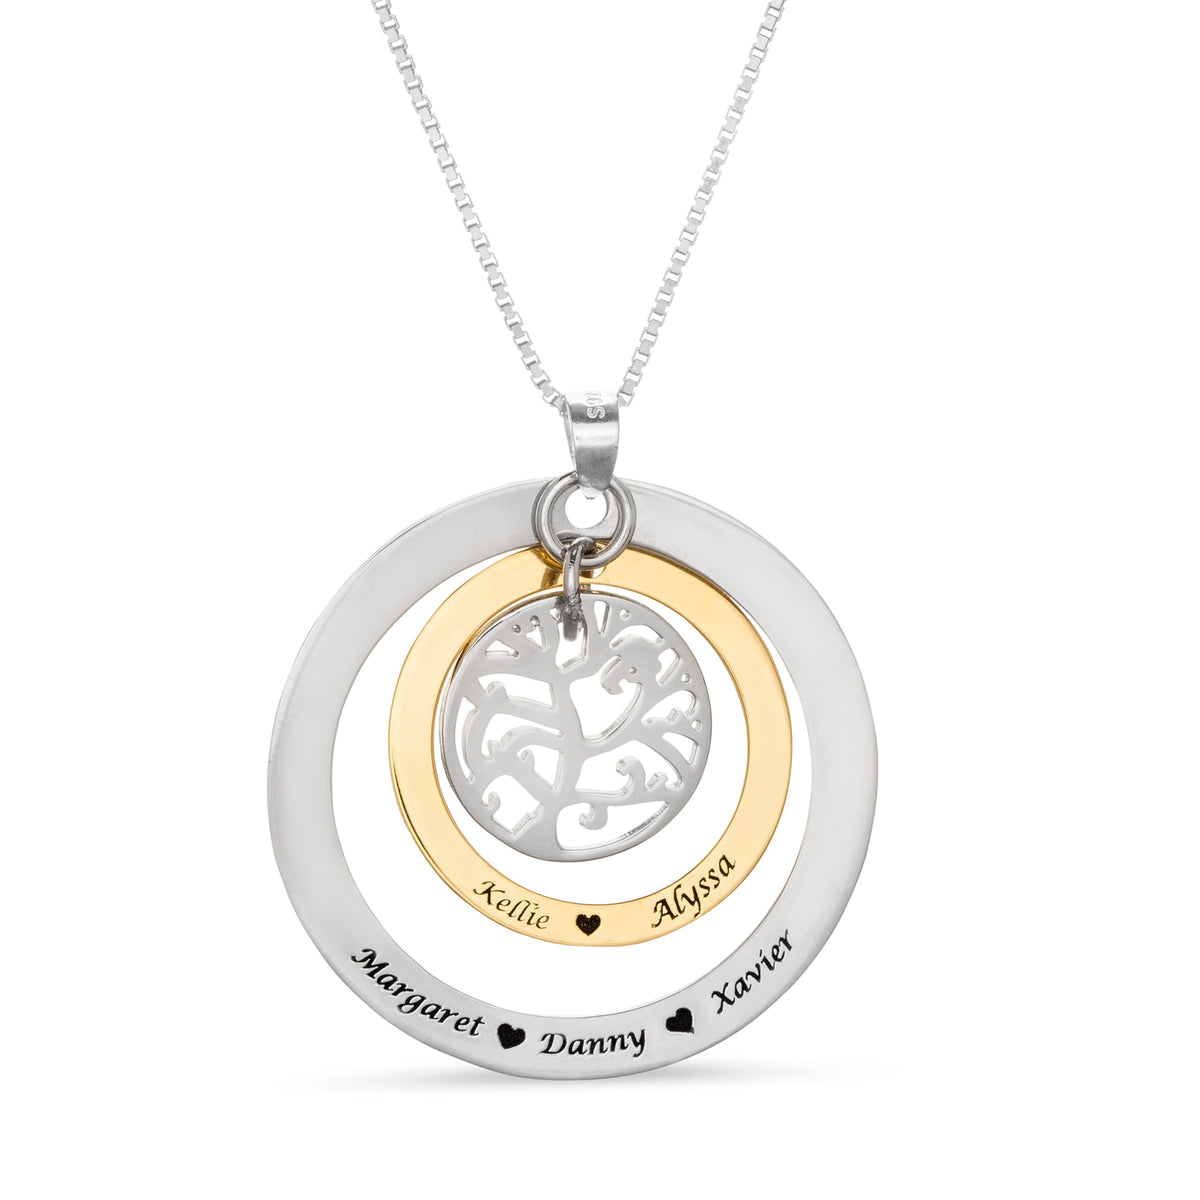 Circles Of Loved Ones Family Tree Necklace